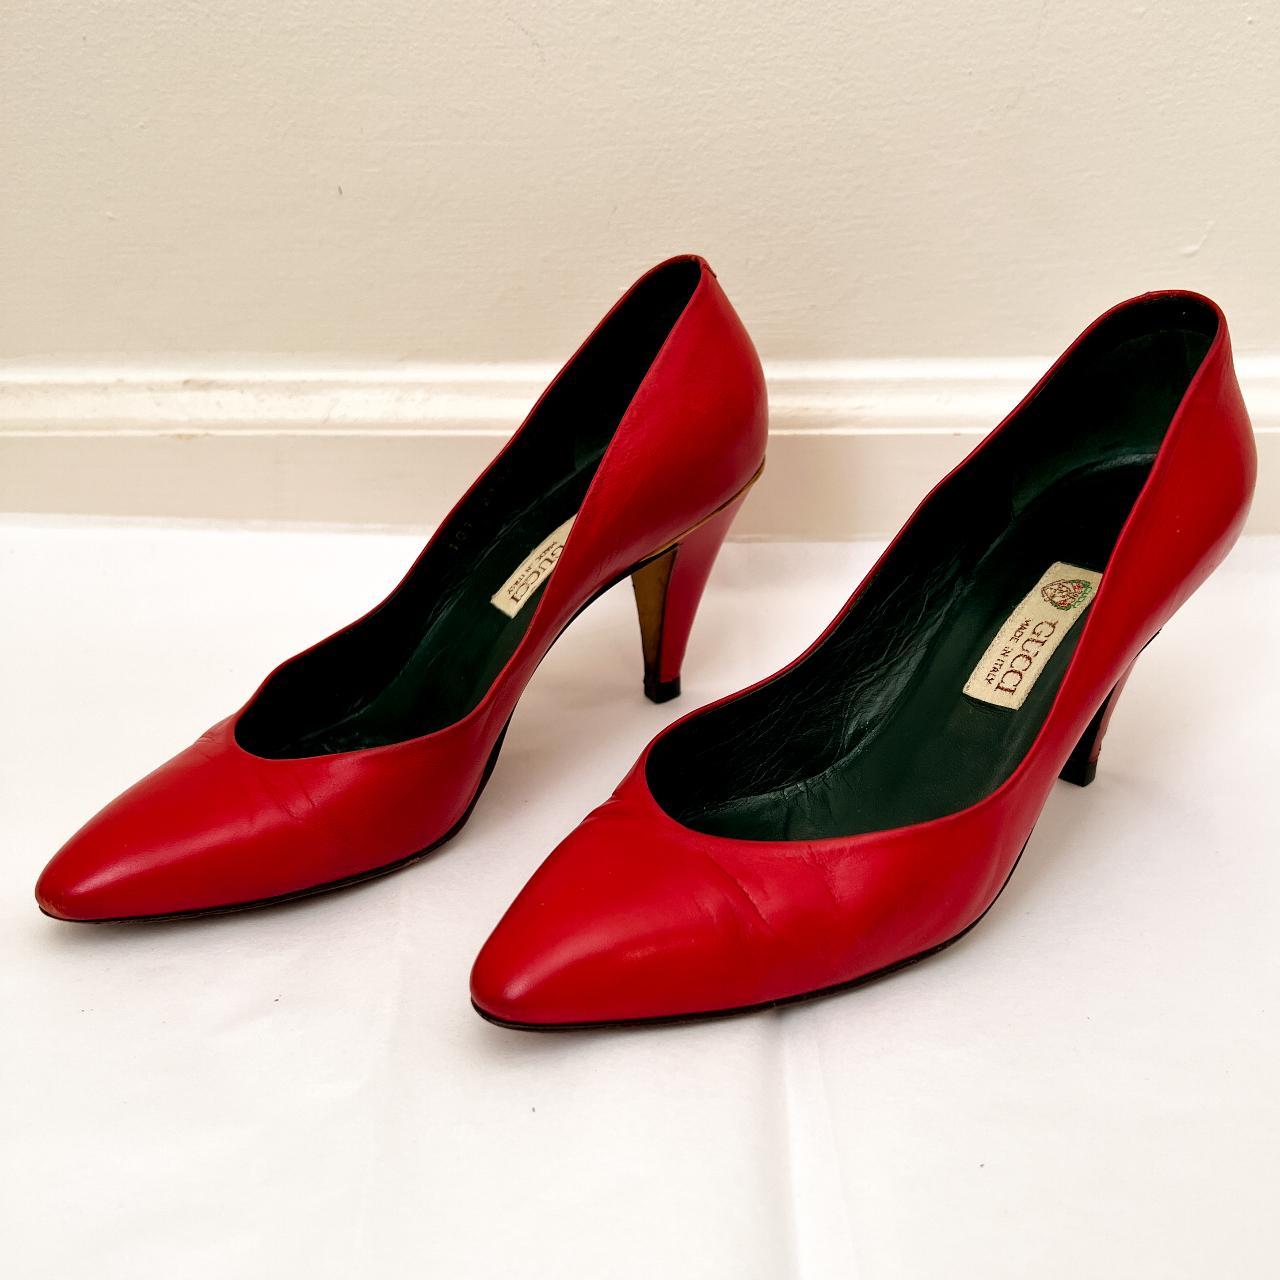 ⚡️ classic pair of GUCCI red pumps from the 1980s.... - Depop